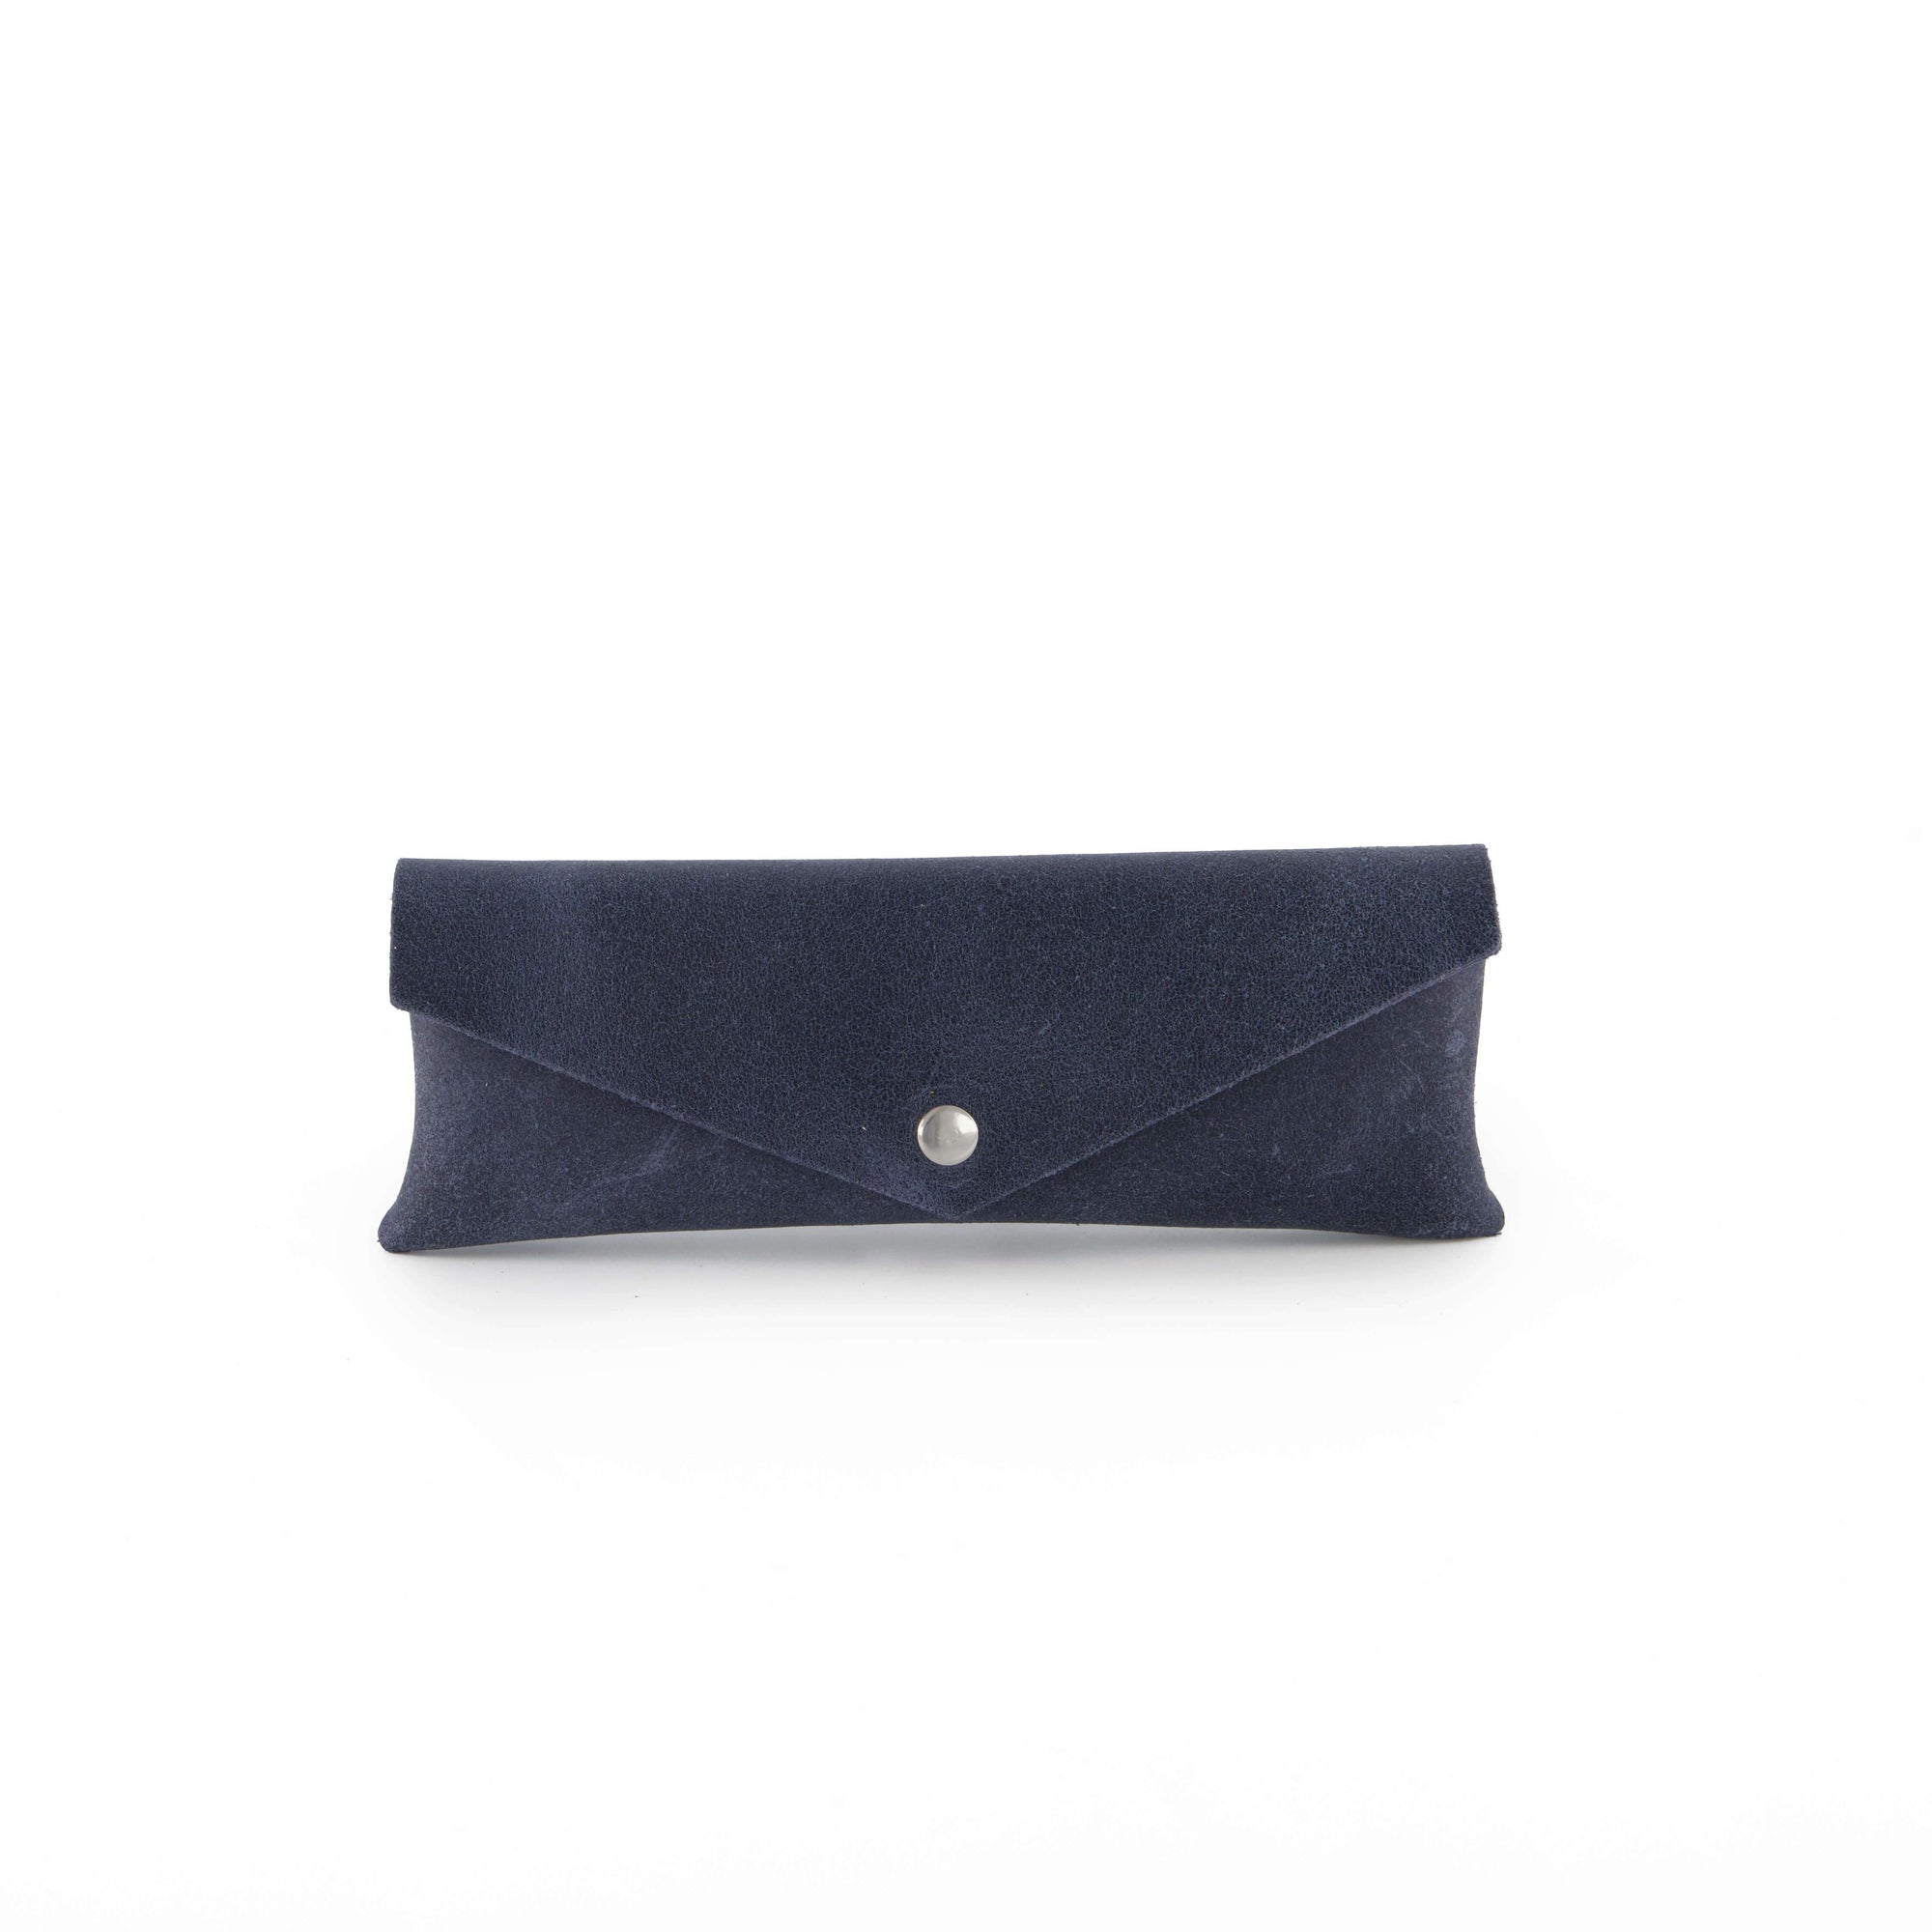 leather sunglasses case, leather pouch, leather envelope pouch, small gift, accessories, navy leather case, pencils case, handmade leather, ||Navy||